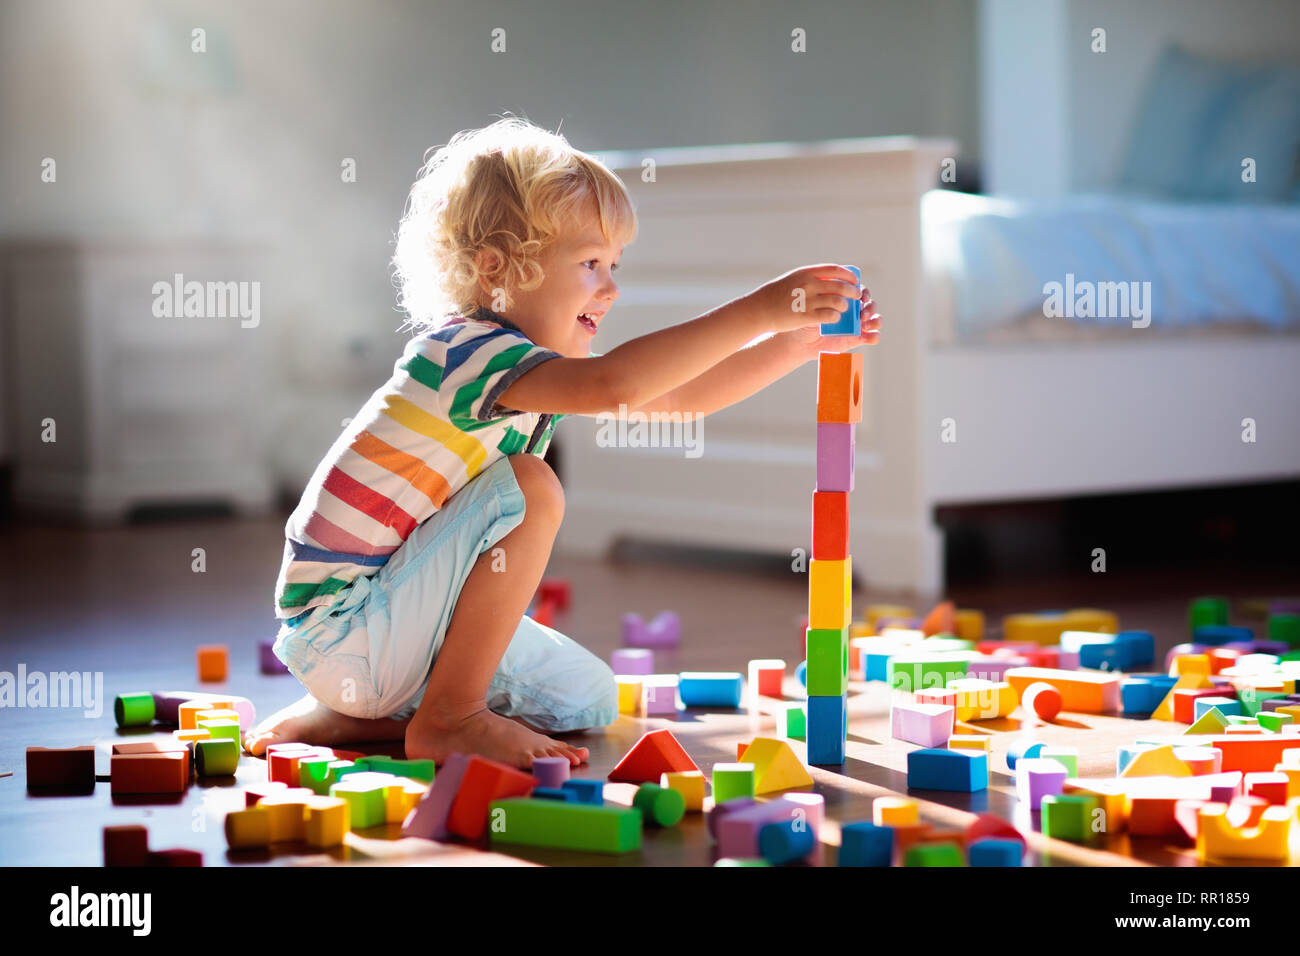 Child Playing With Colorful Toy Blocks Kids Play Little Boy Building